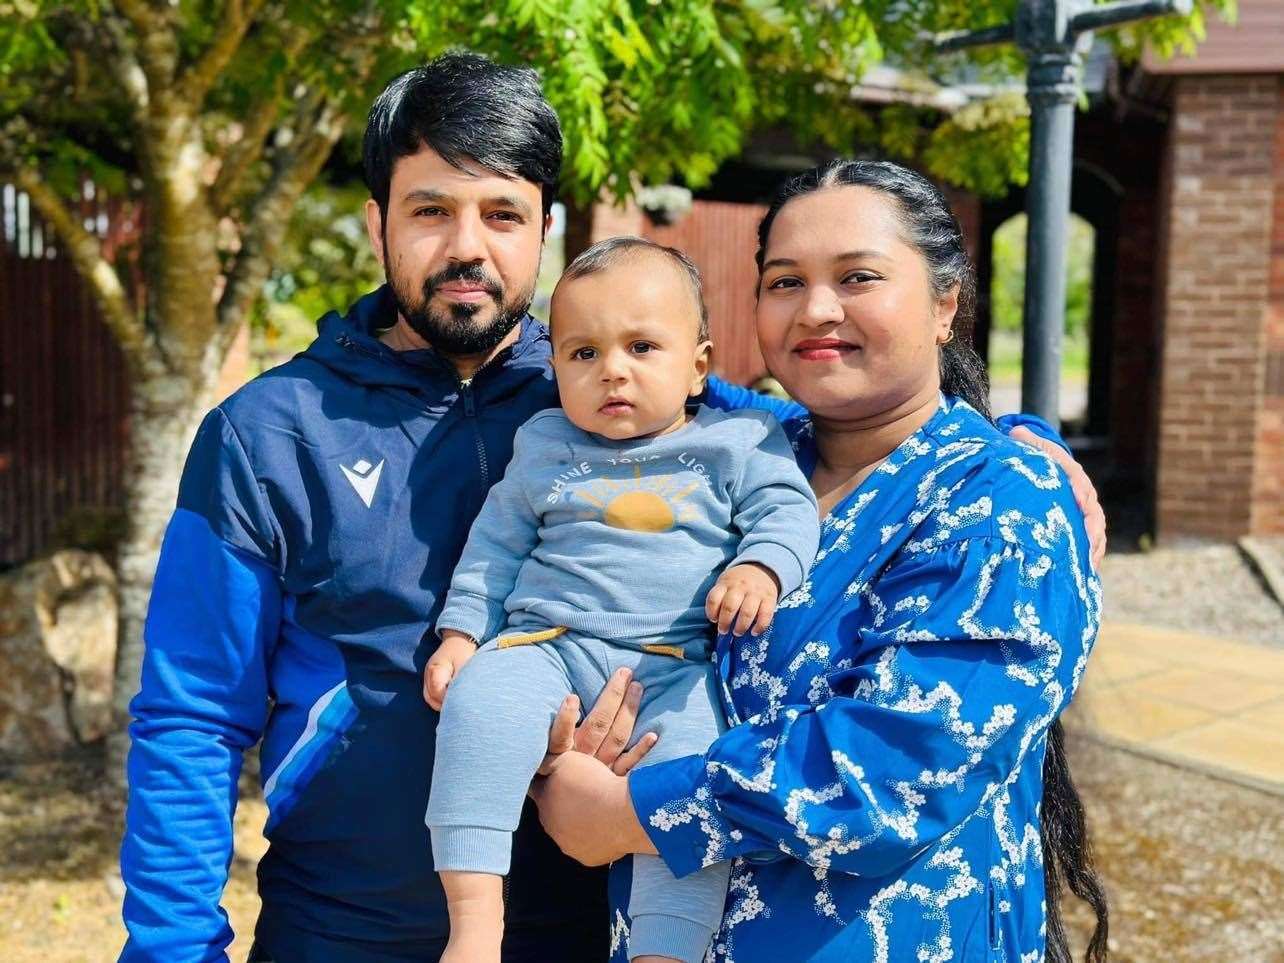 Ashiqur Rahman (known as Rana) and Tahmina Uddin with their son Izhaan. They will soon open their new family business Nippy Naga at Dows bar & Bistro.